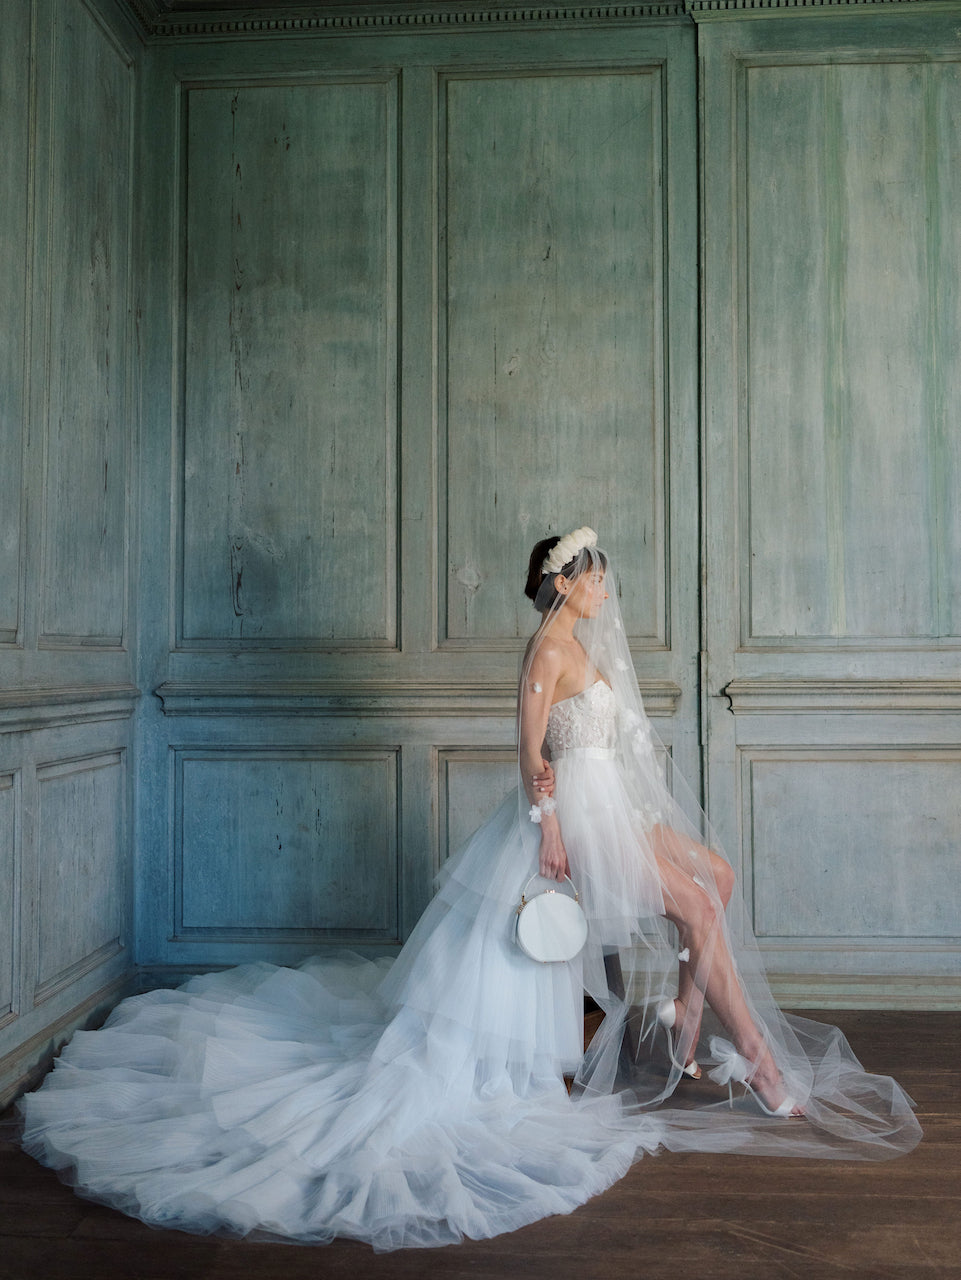 A vintage-inspired bride in a white wedding dress sitting on a wooden floor with The Bella Rosa Collection's "The Original Hat Box".